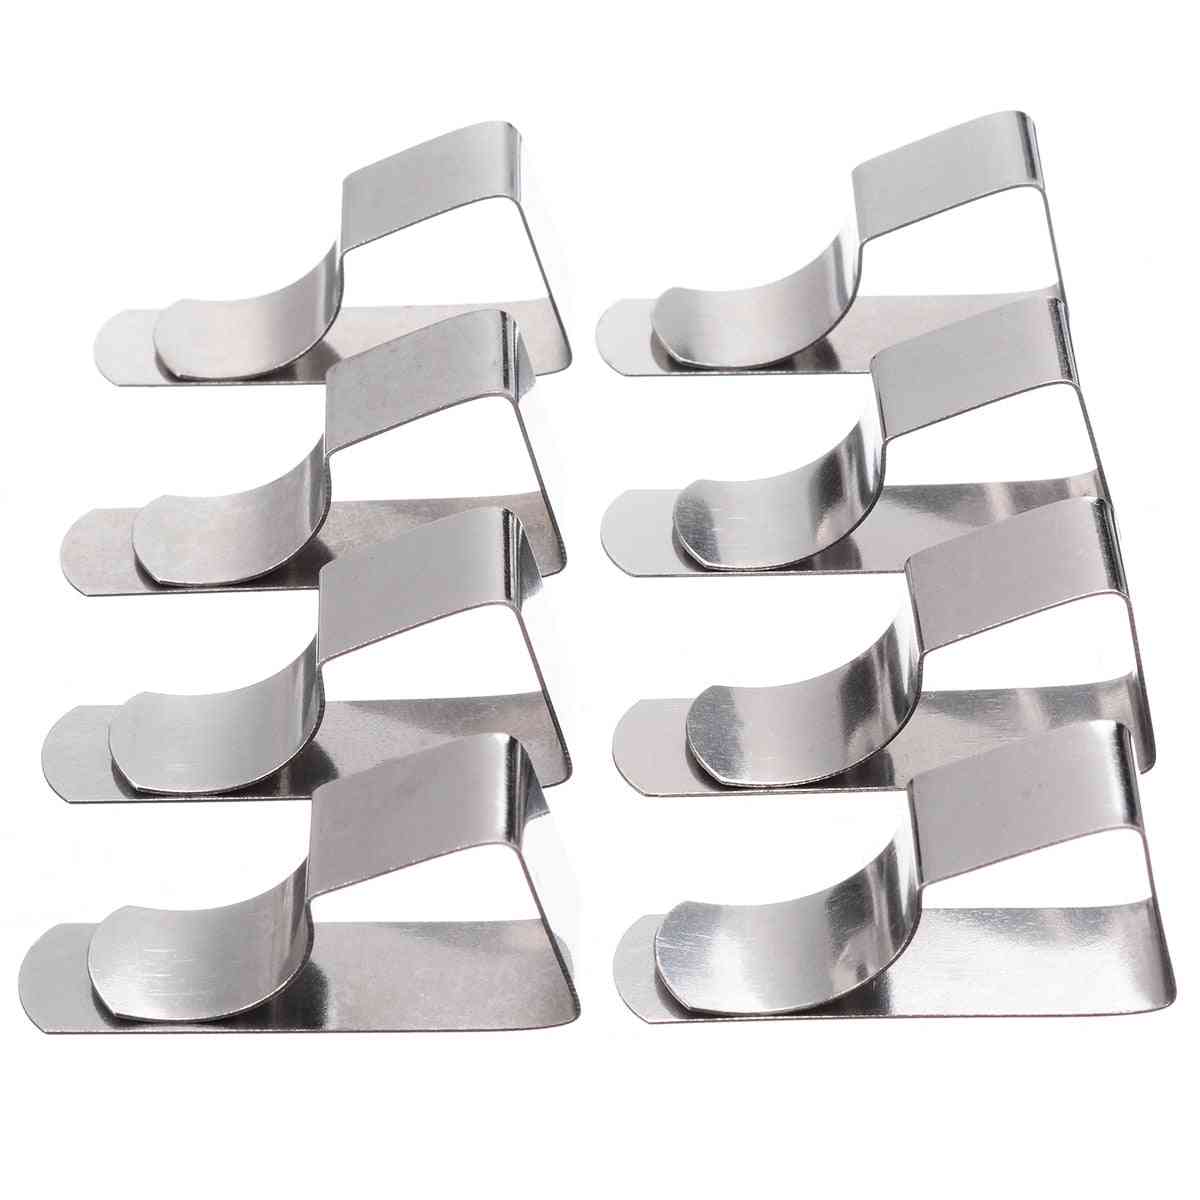 Stainless Steel Table Cloth Clip. Wedding Table Cover Clips